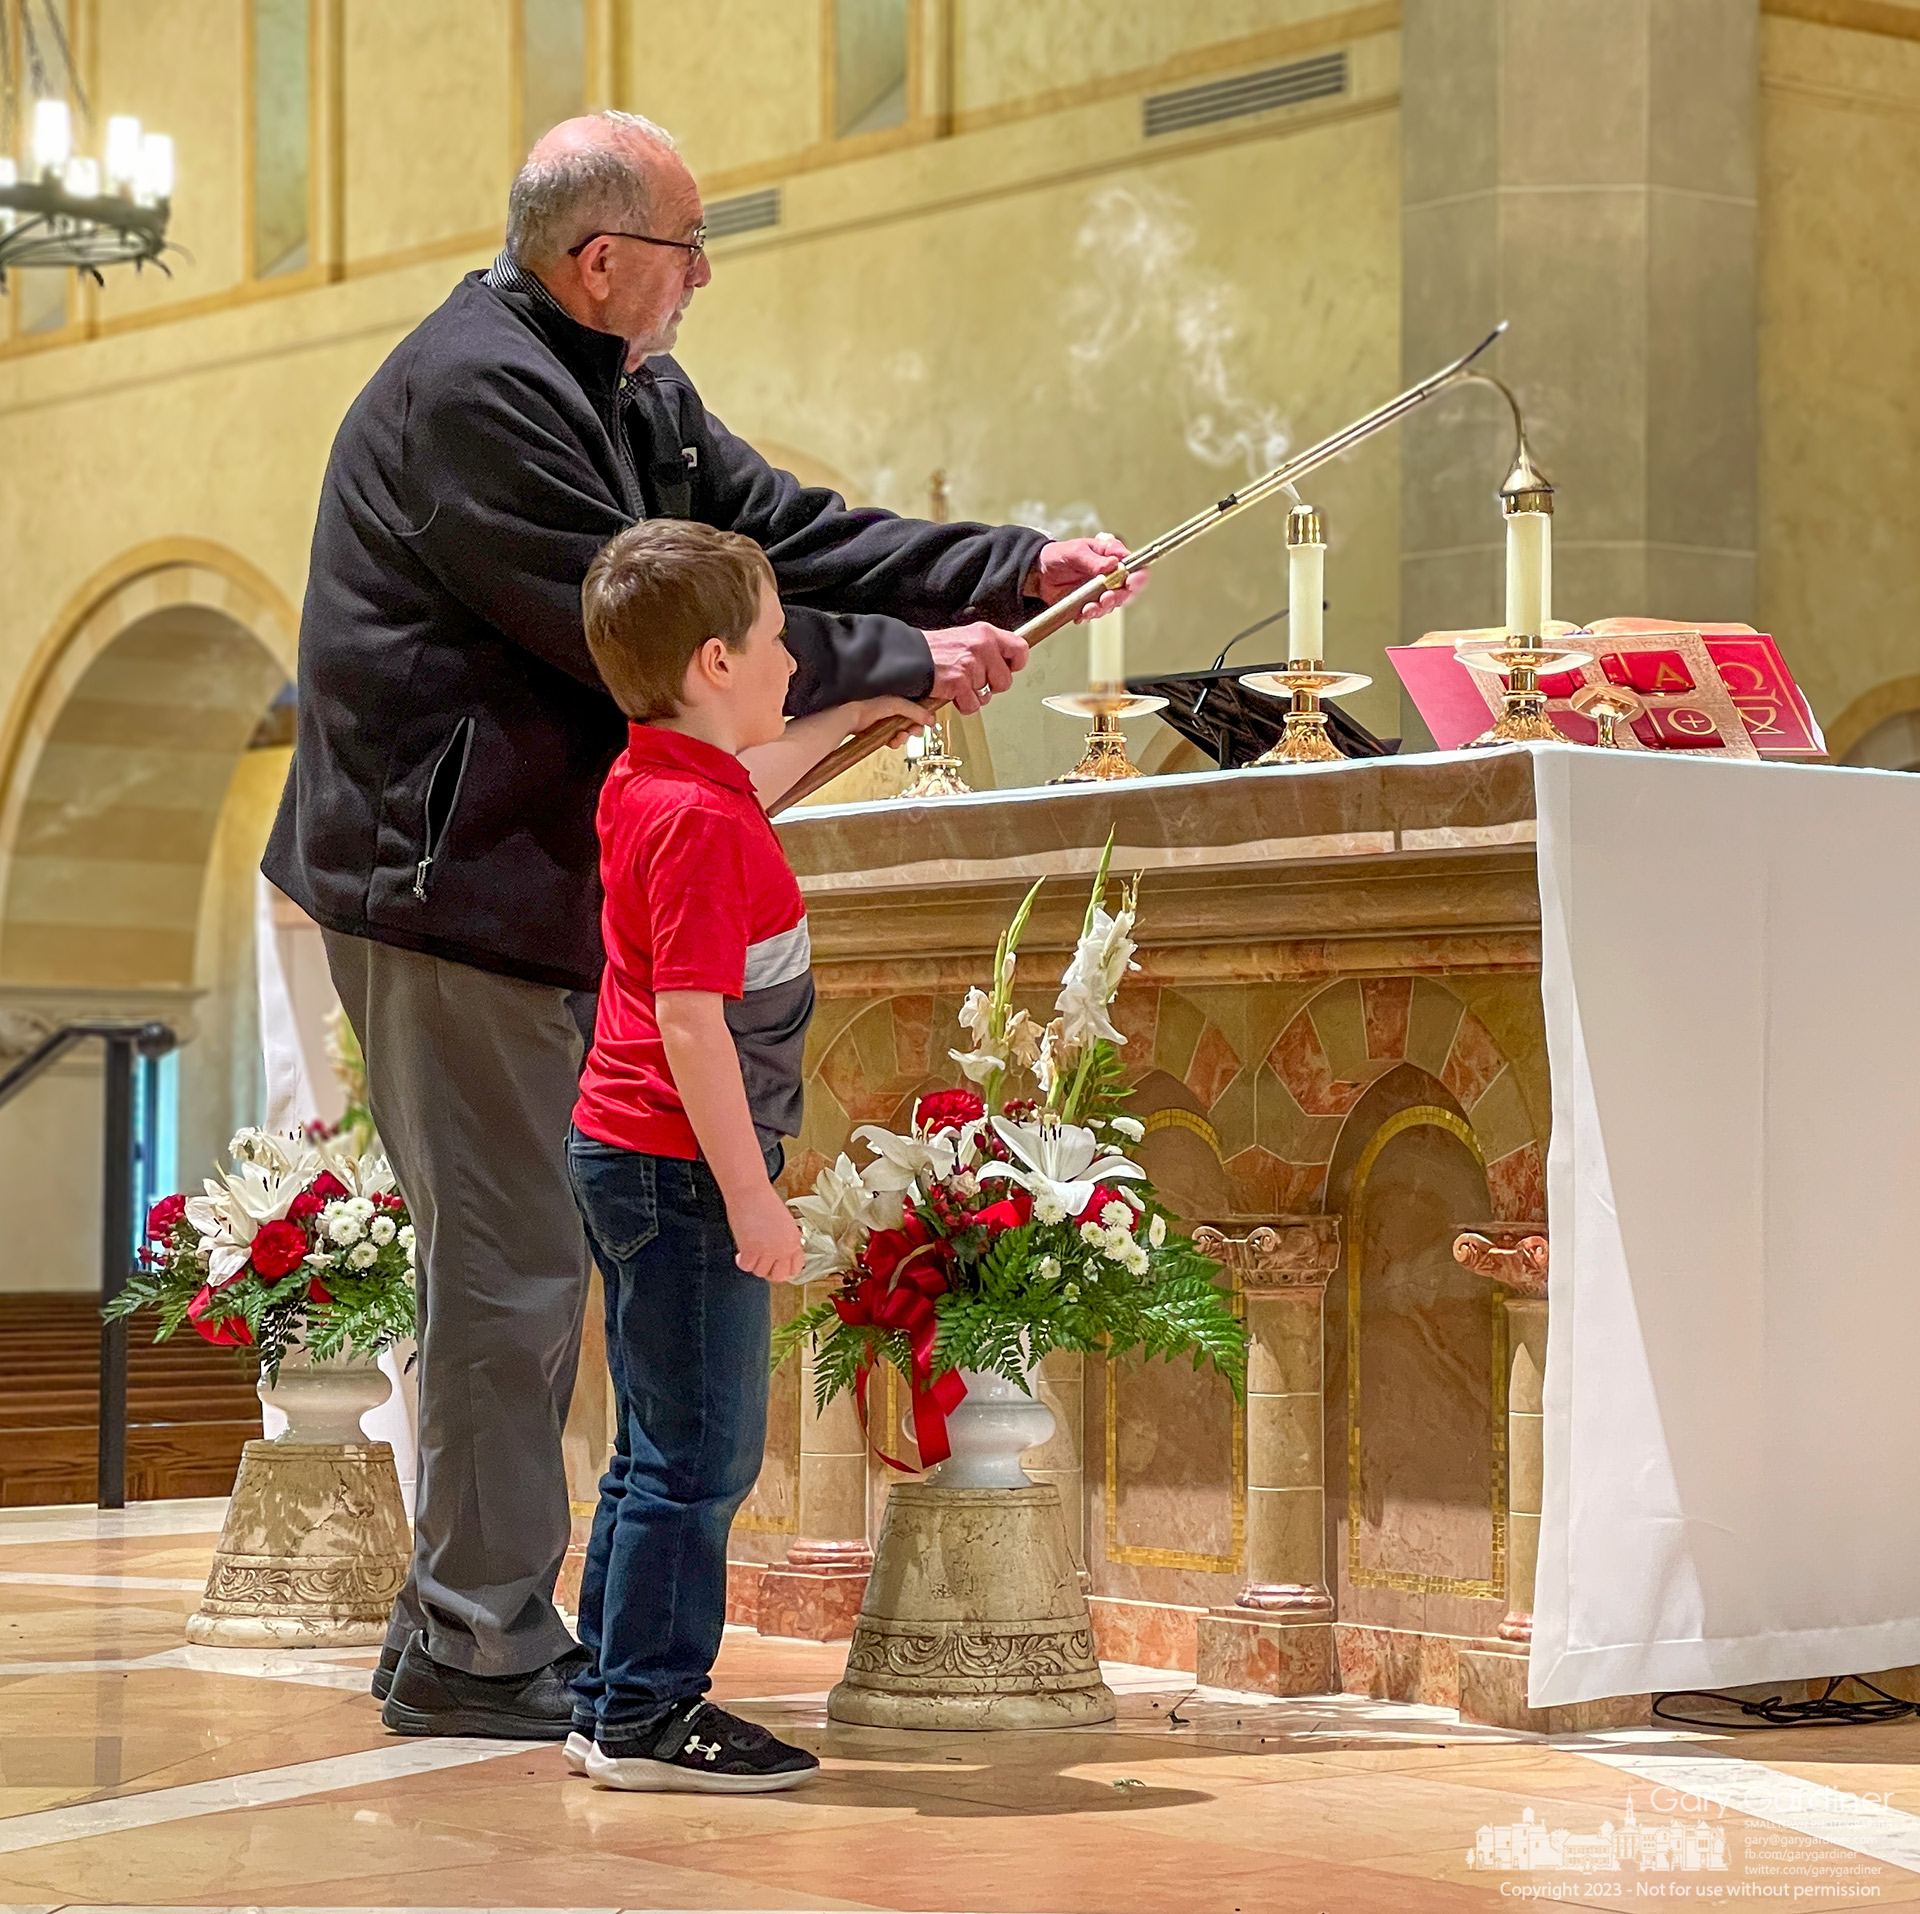 An usher at St. Paul the Apostle Catholic Church gets an assist extinguishing candles on the altar after the early Sunday Mass. My Final Photo for April 30, 2023.